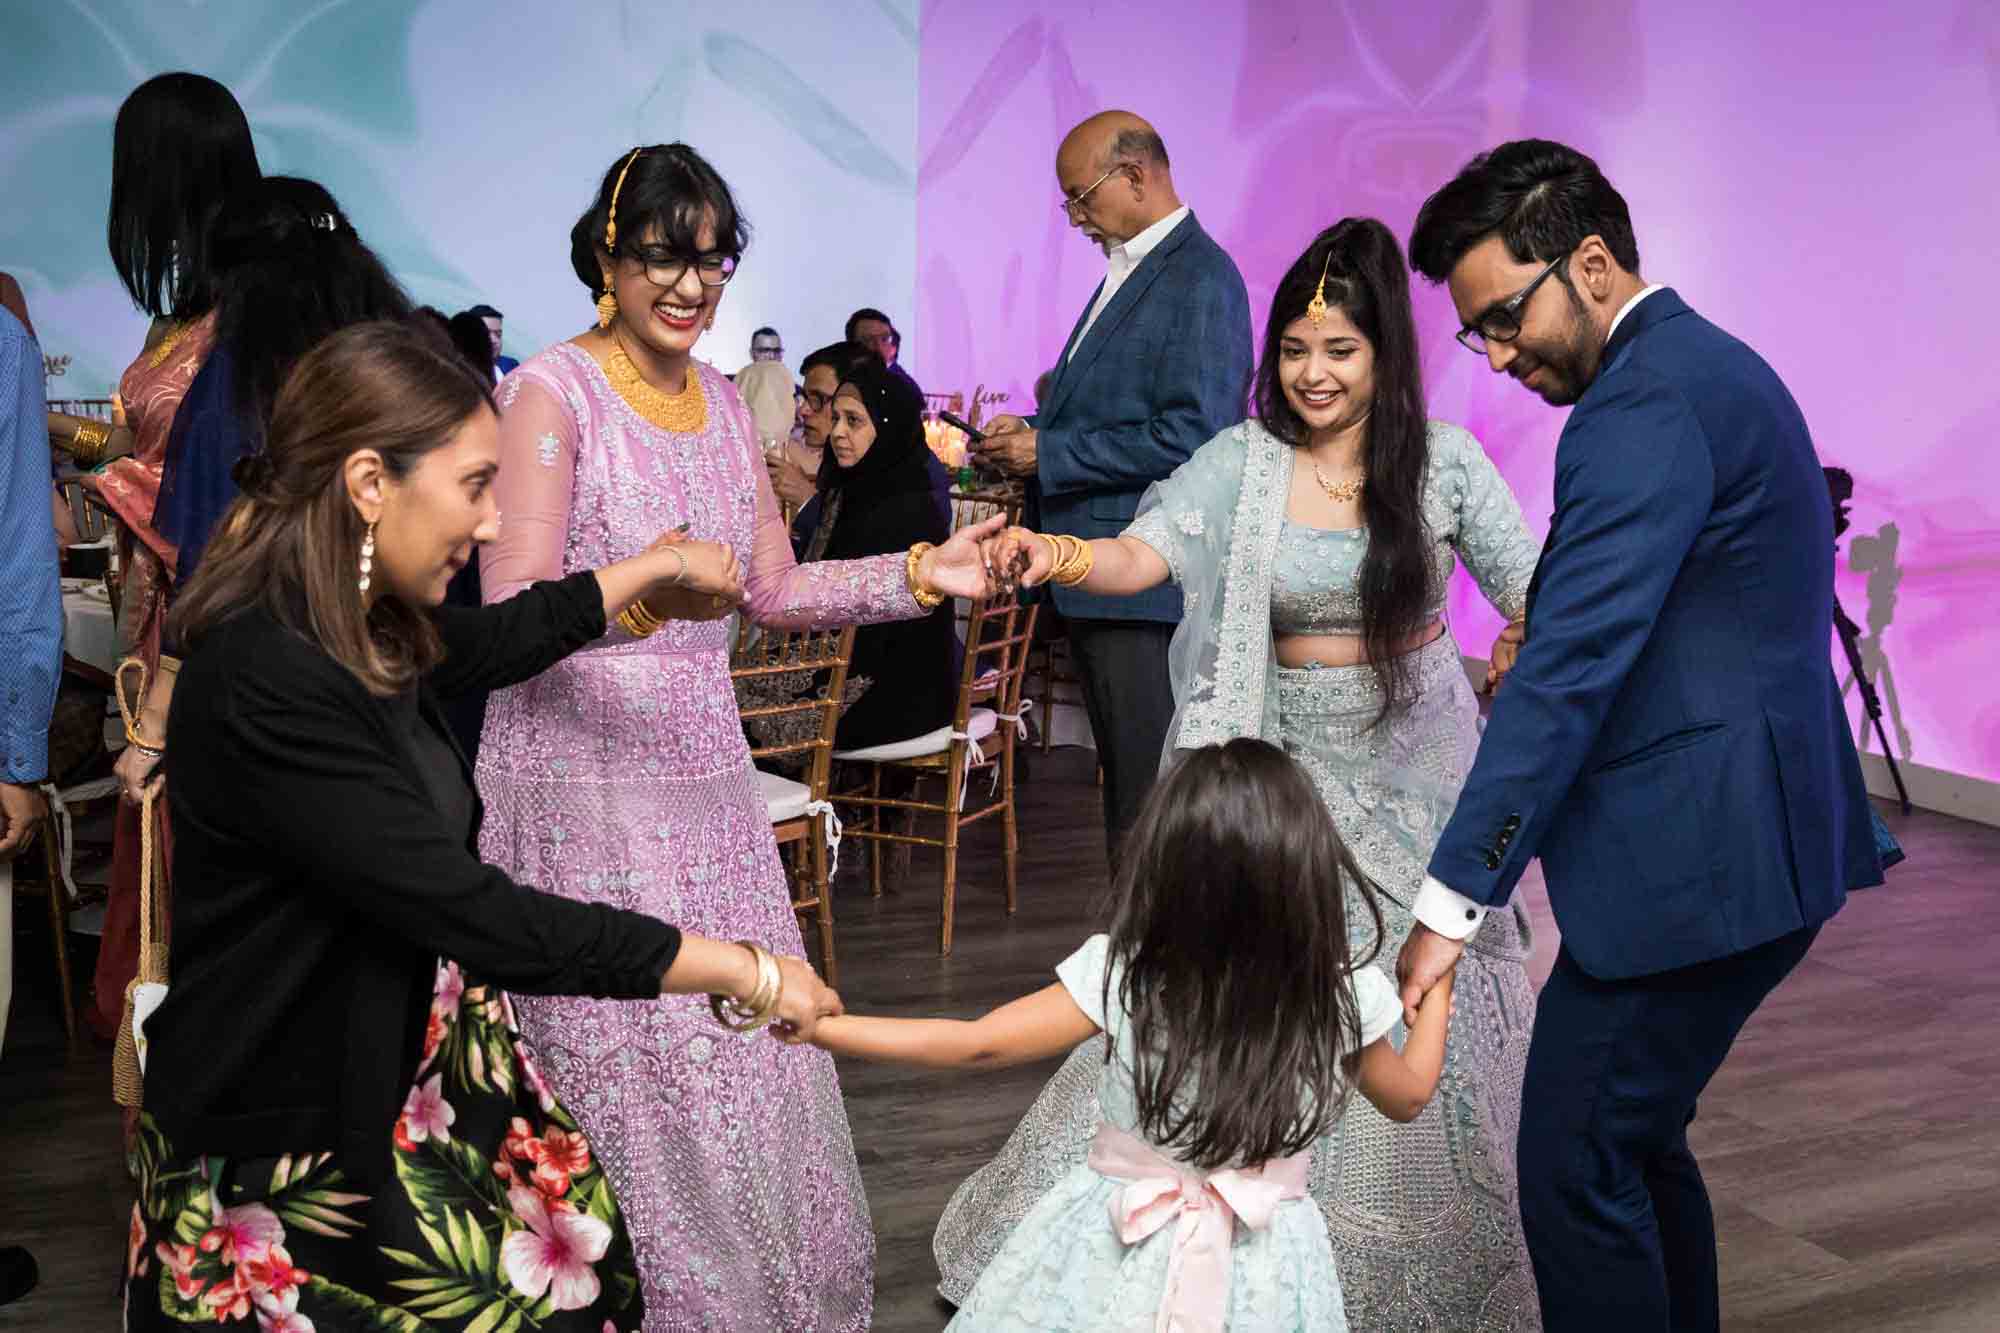 Family dancing together while holding hands Bride and groom holding up shoes on dance floor for article on wedding reception game ideas